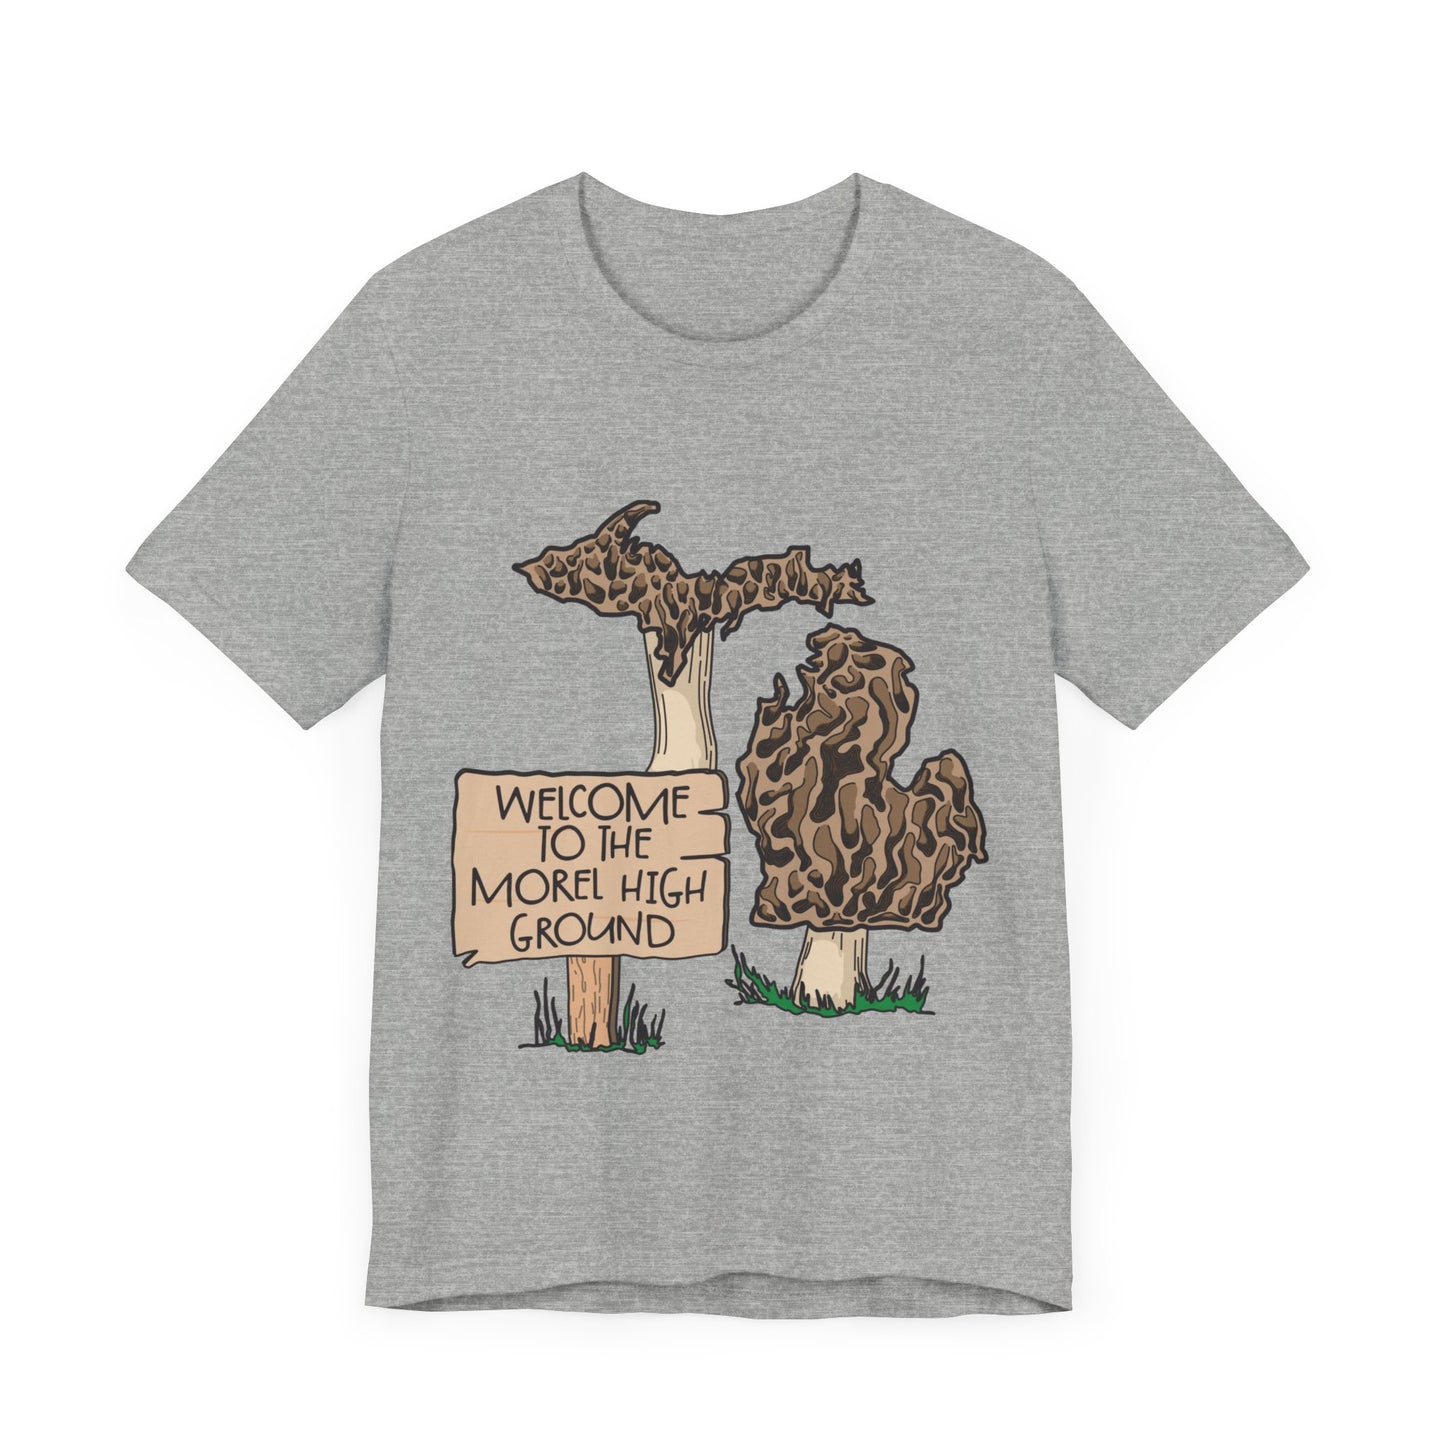 Welcome to the Morel High Ground T-Shirt - Celebrate Michigan's Fungi Heritage!